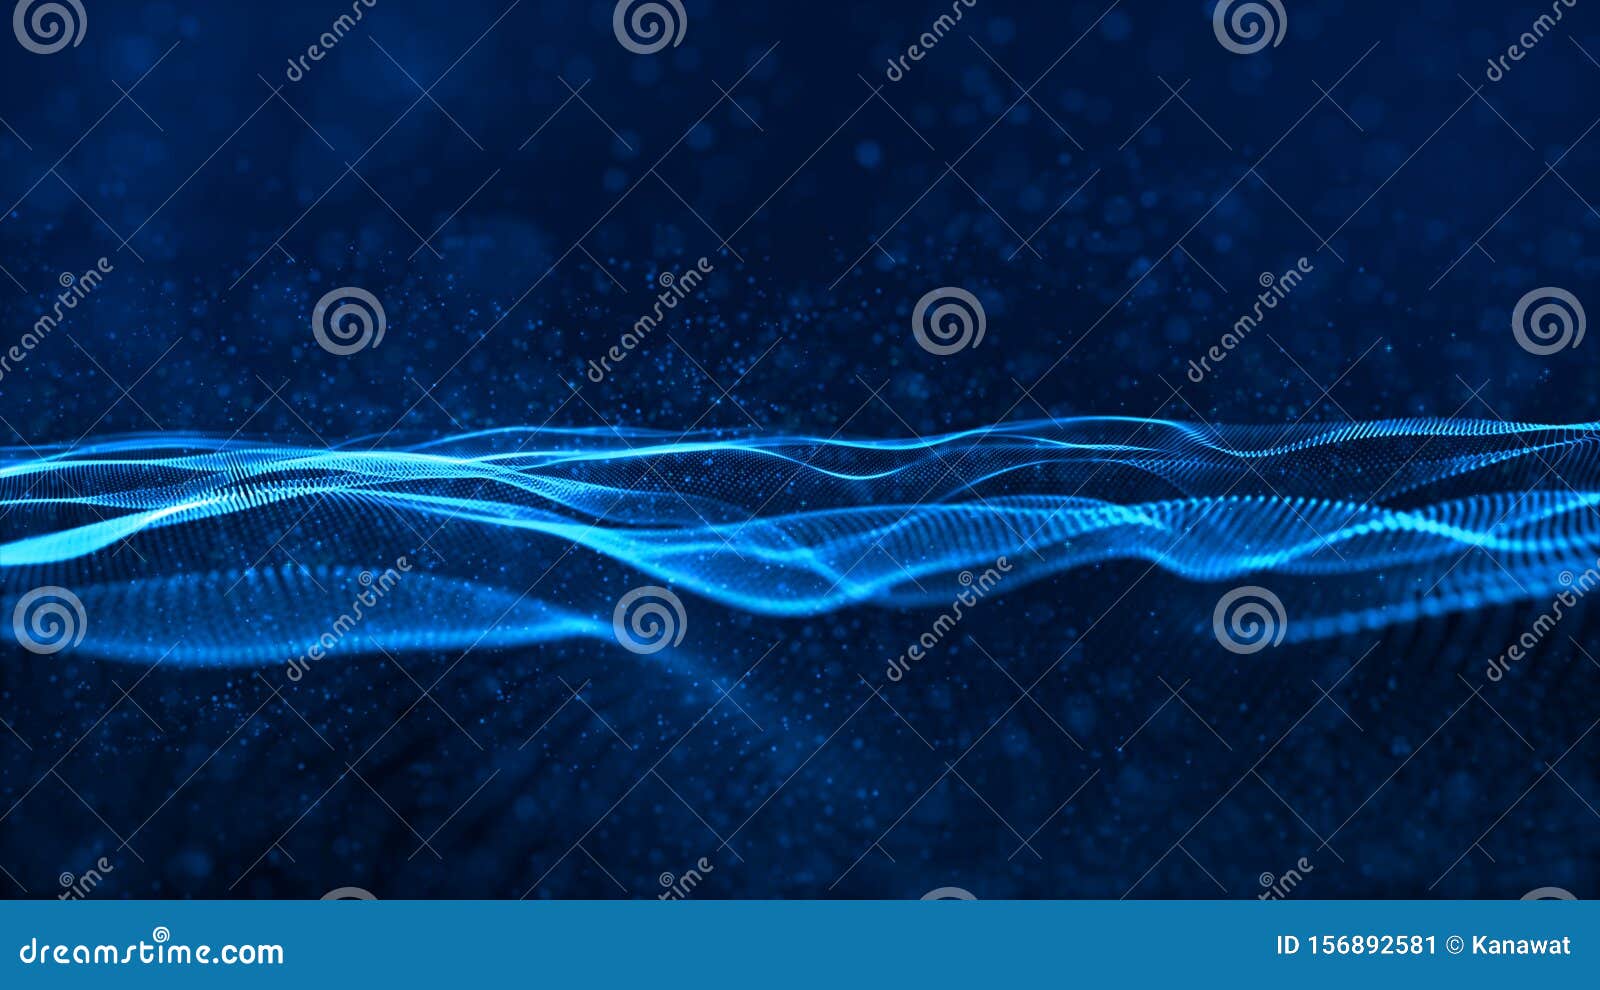 blue color digital particles wave flow cyberspace abstract technology background concept